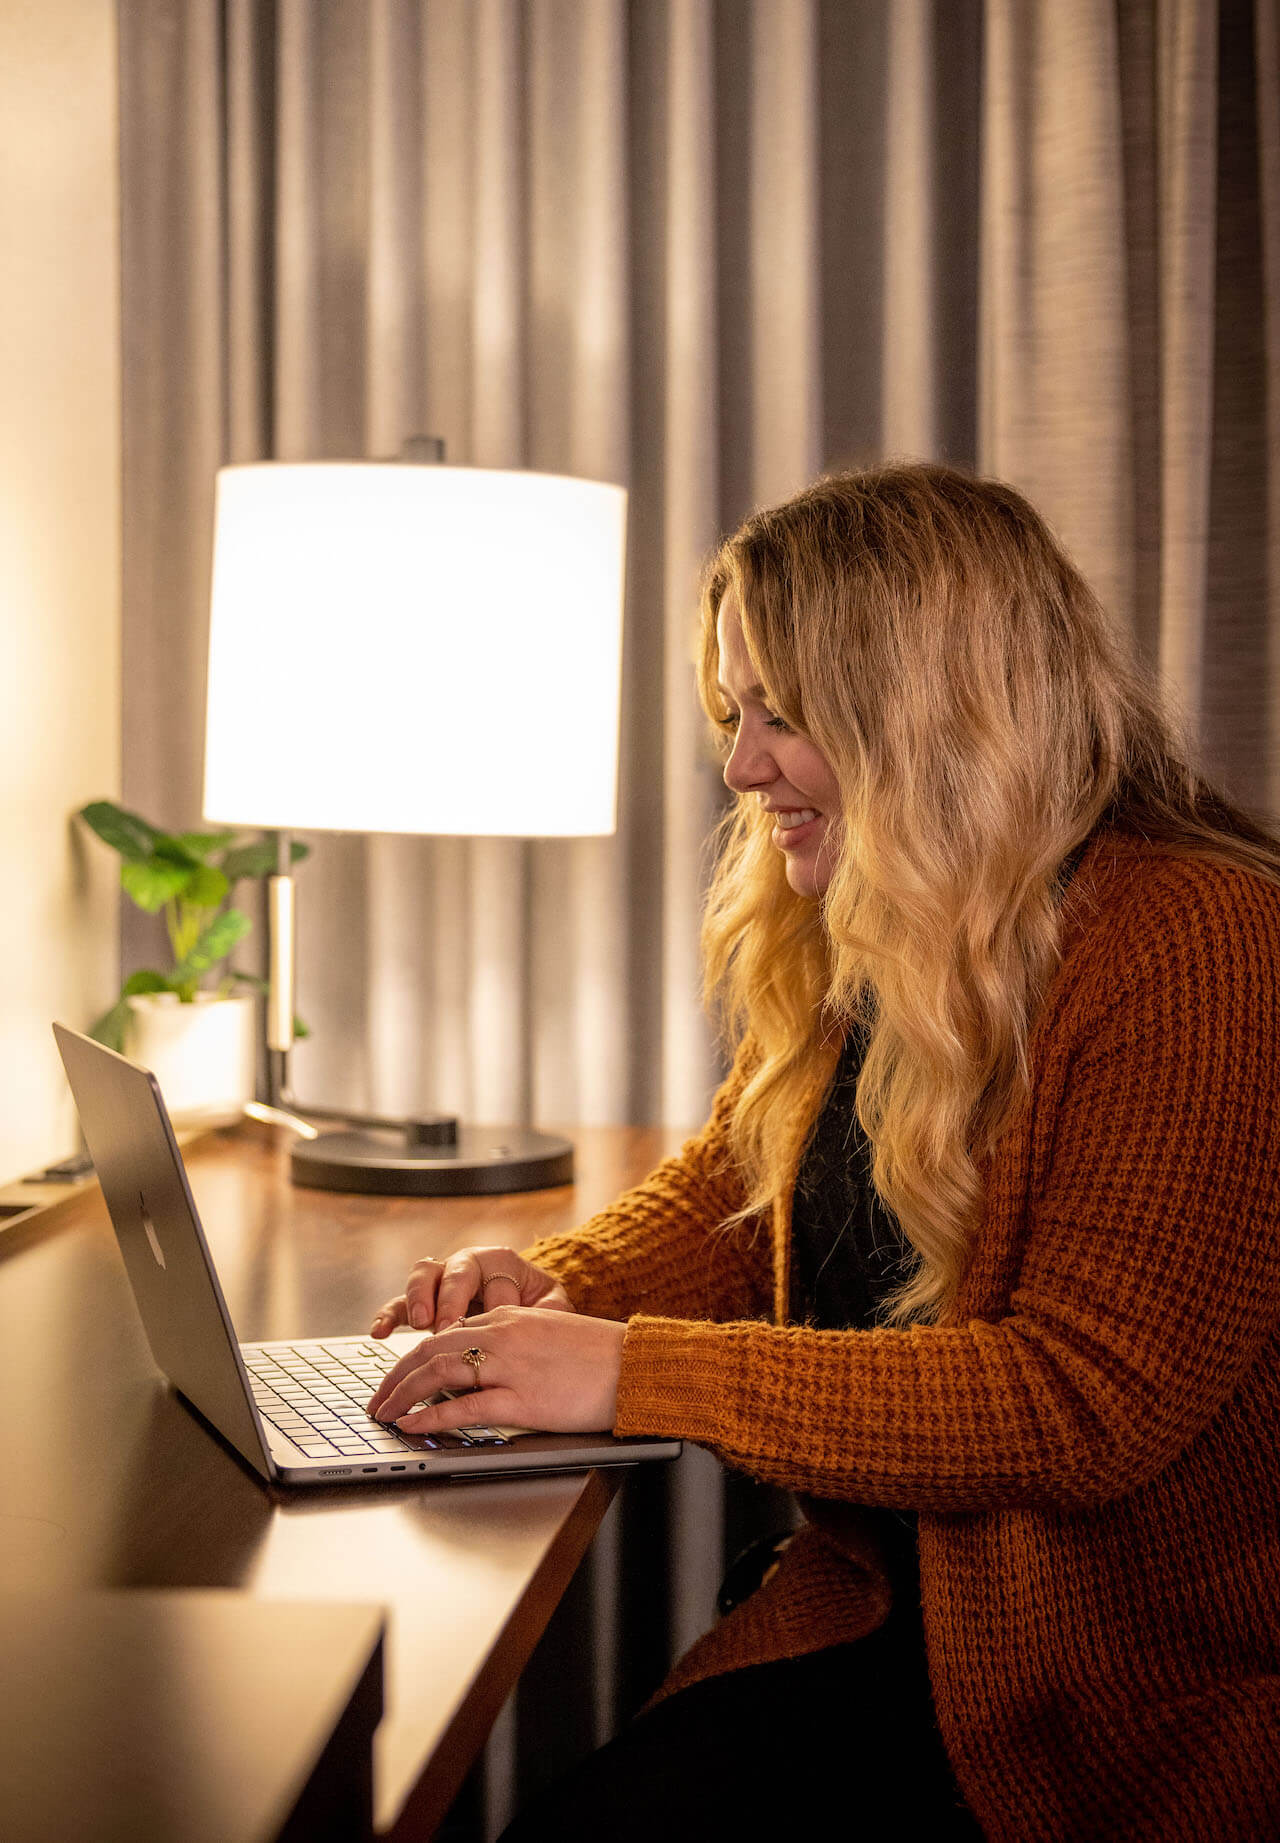 An employee in her hotel room working on her laptop.